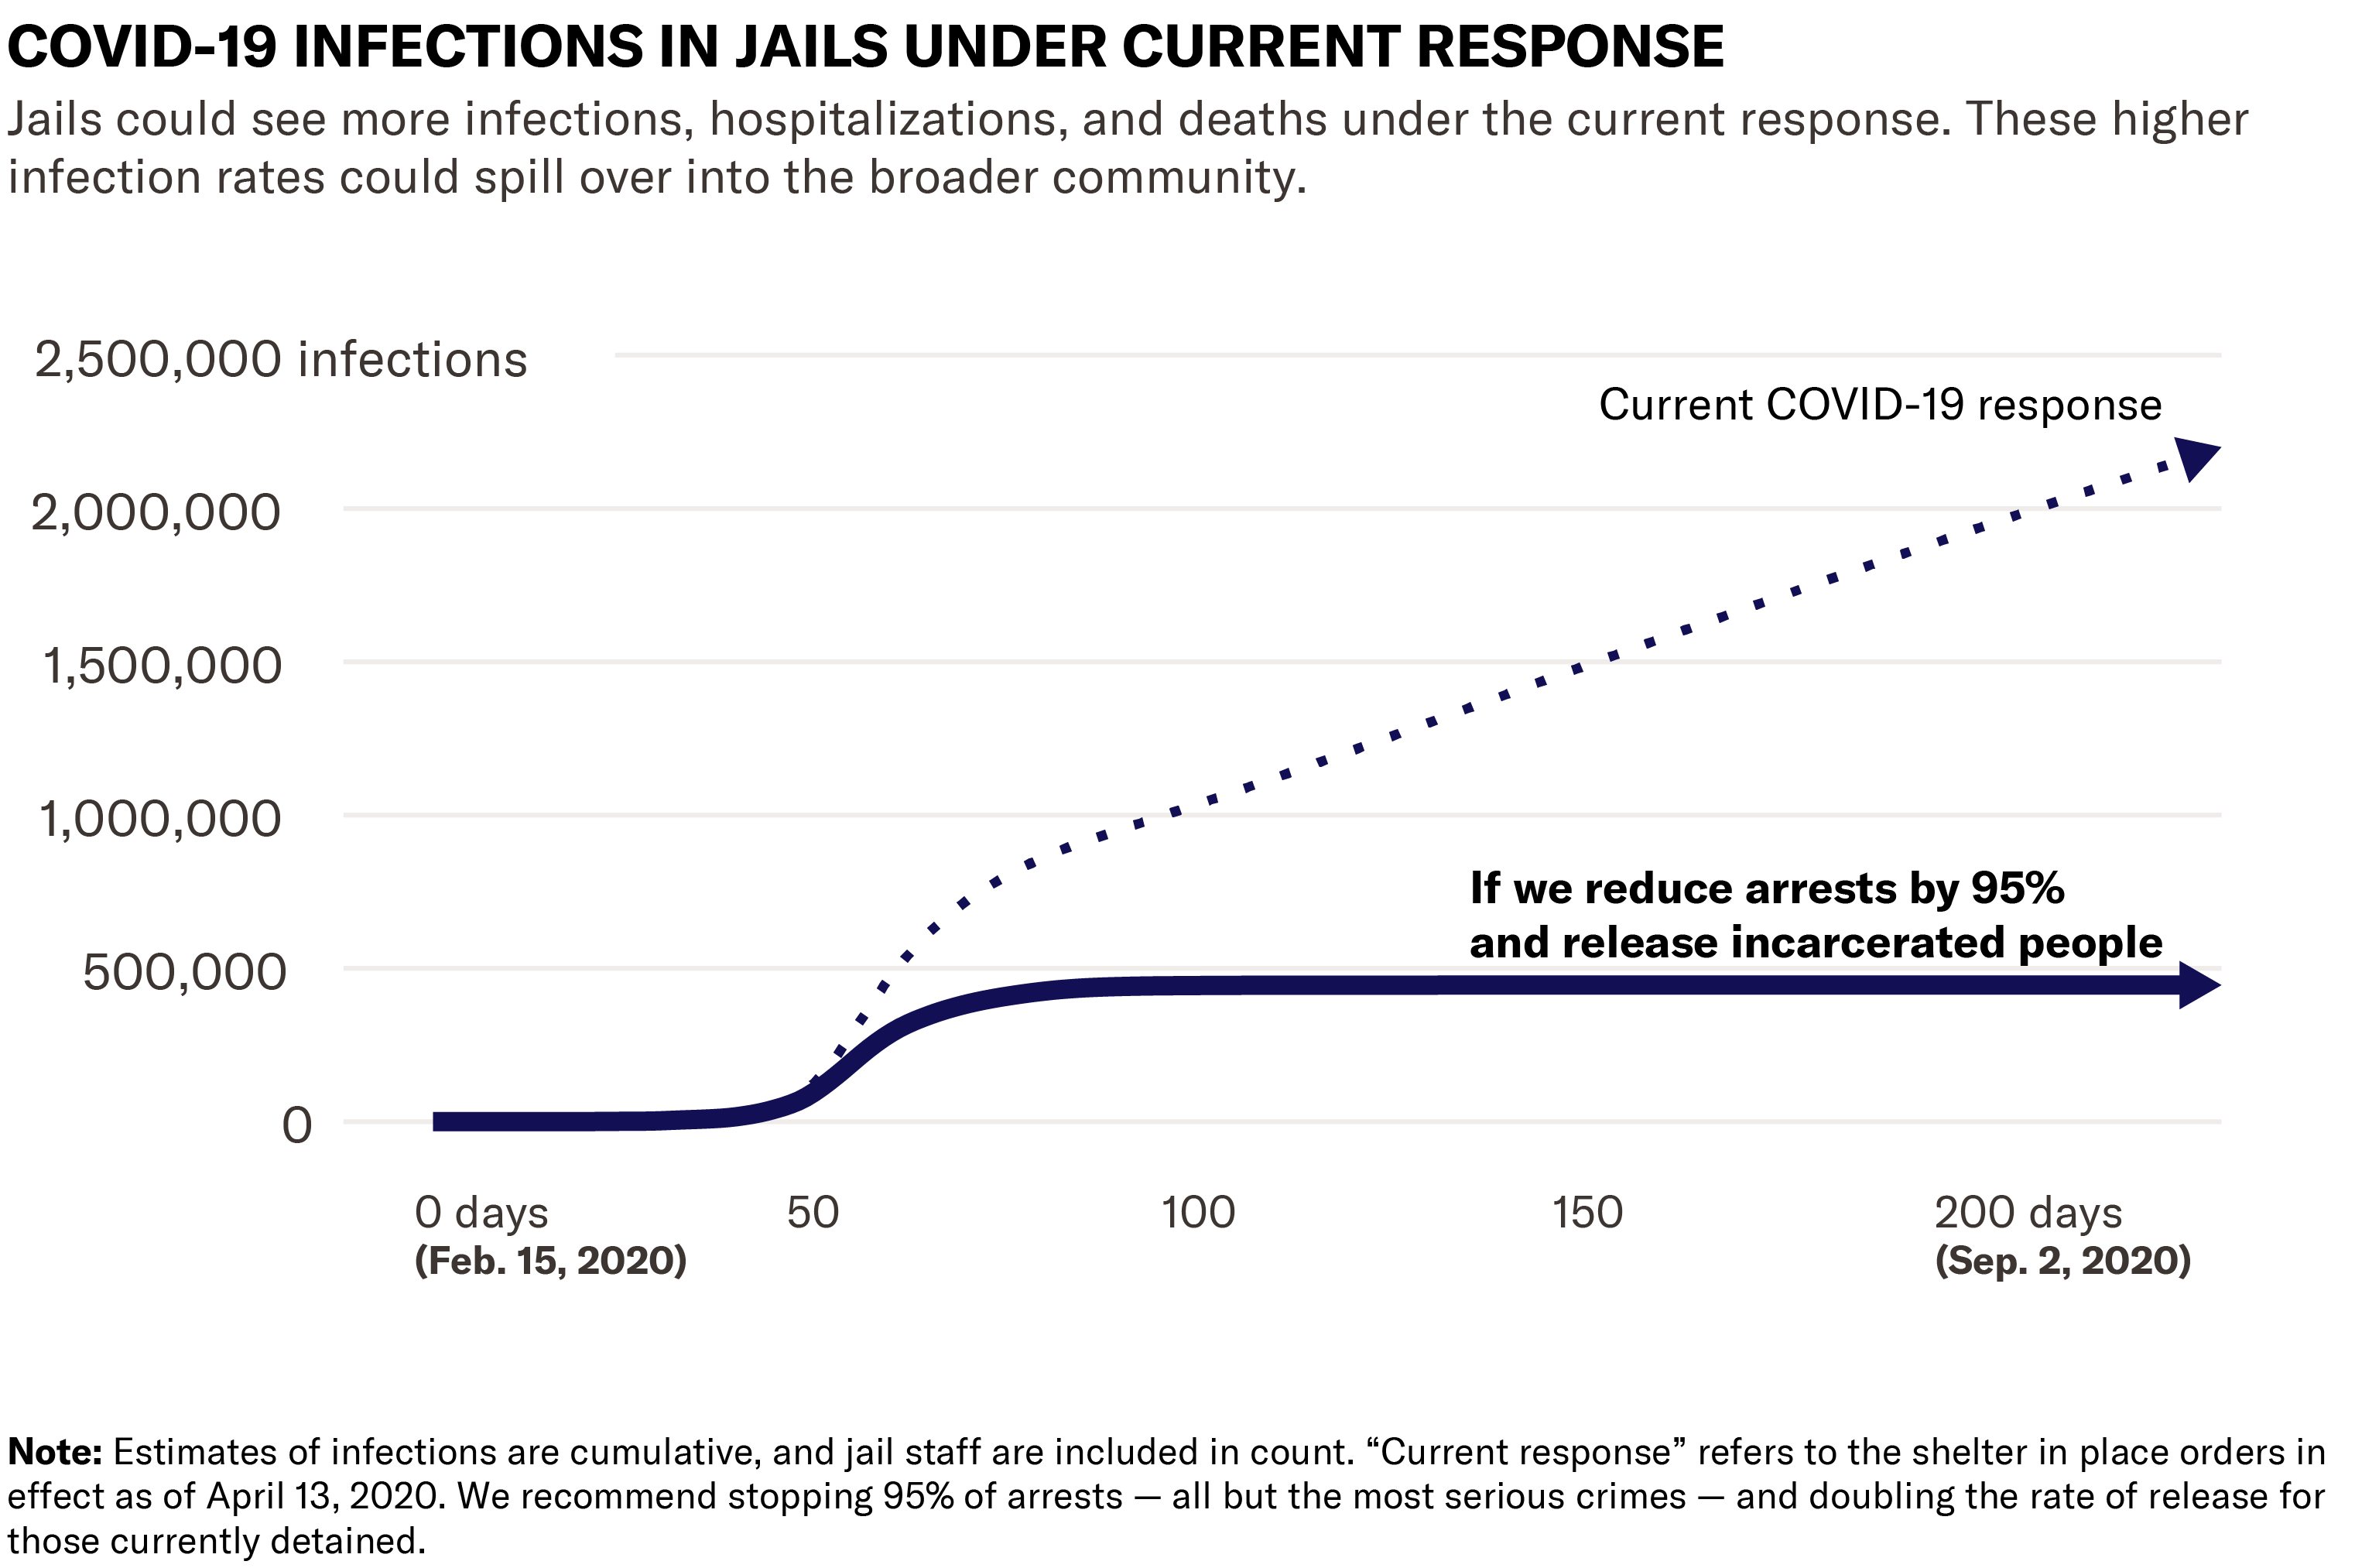 Chart showing covid infections in jail increasing versus plateauing if we release incarcerated people